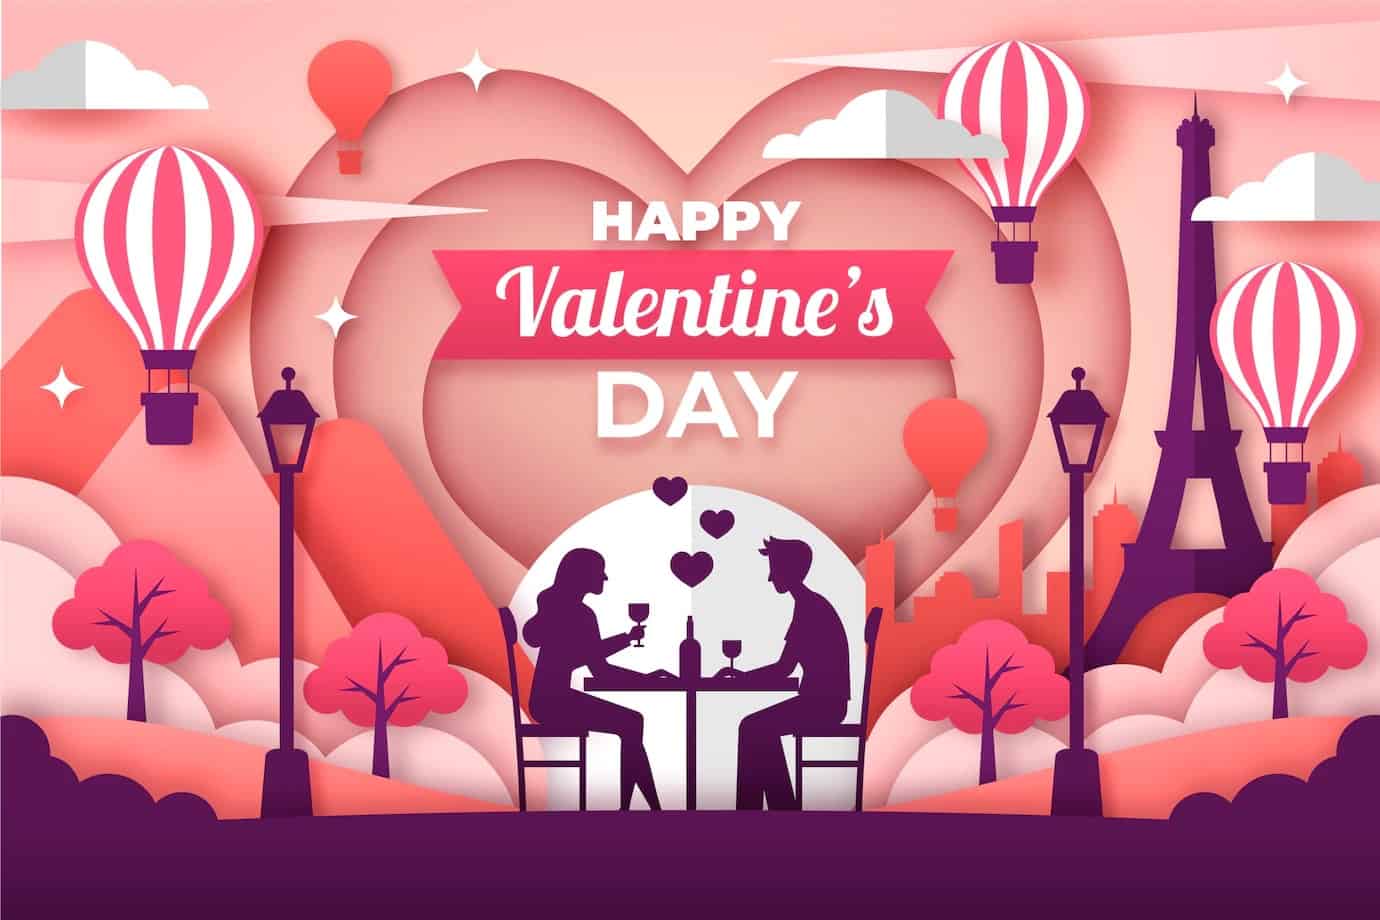 Valentines Day Images for Husband